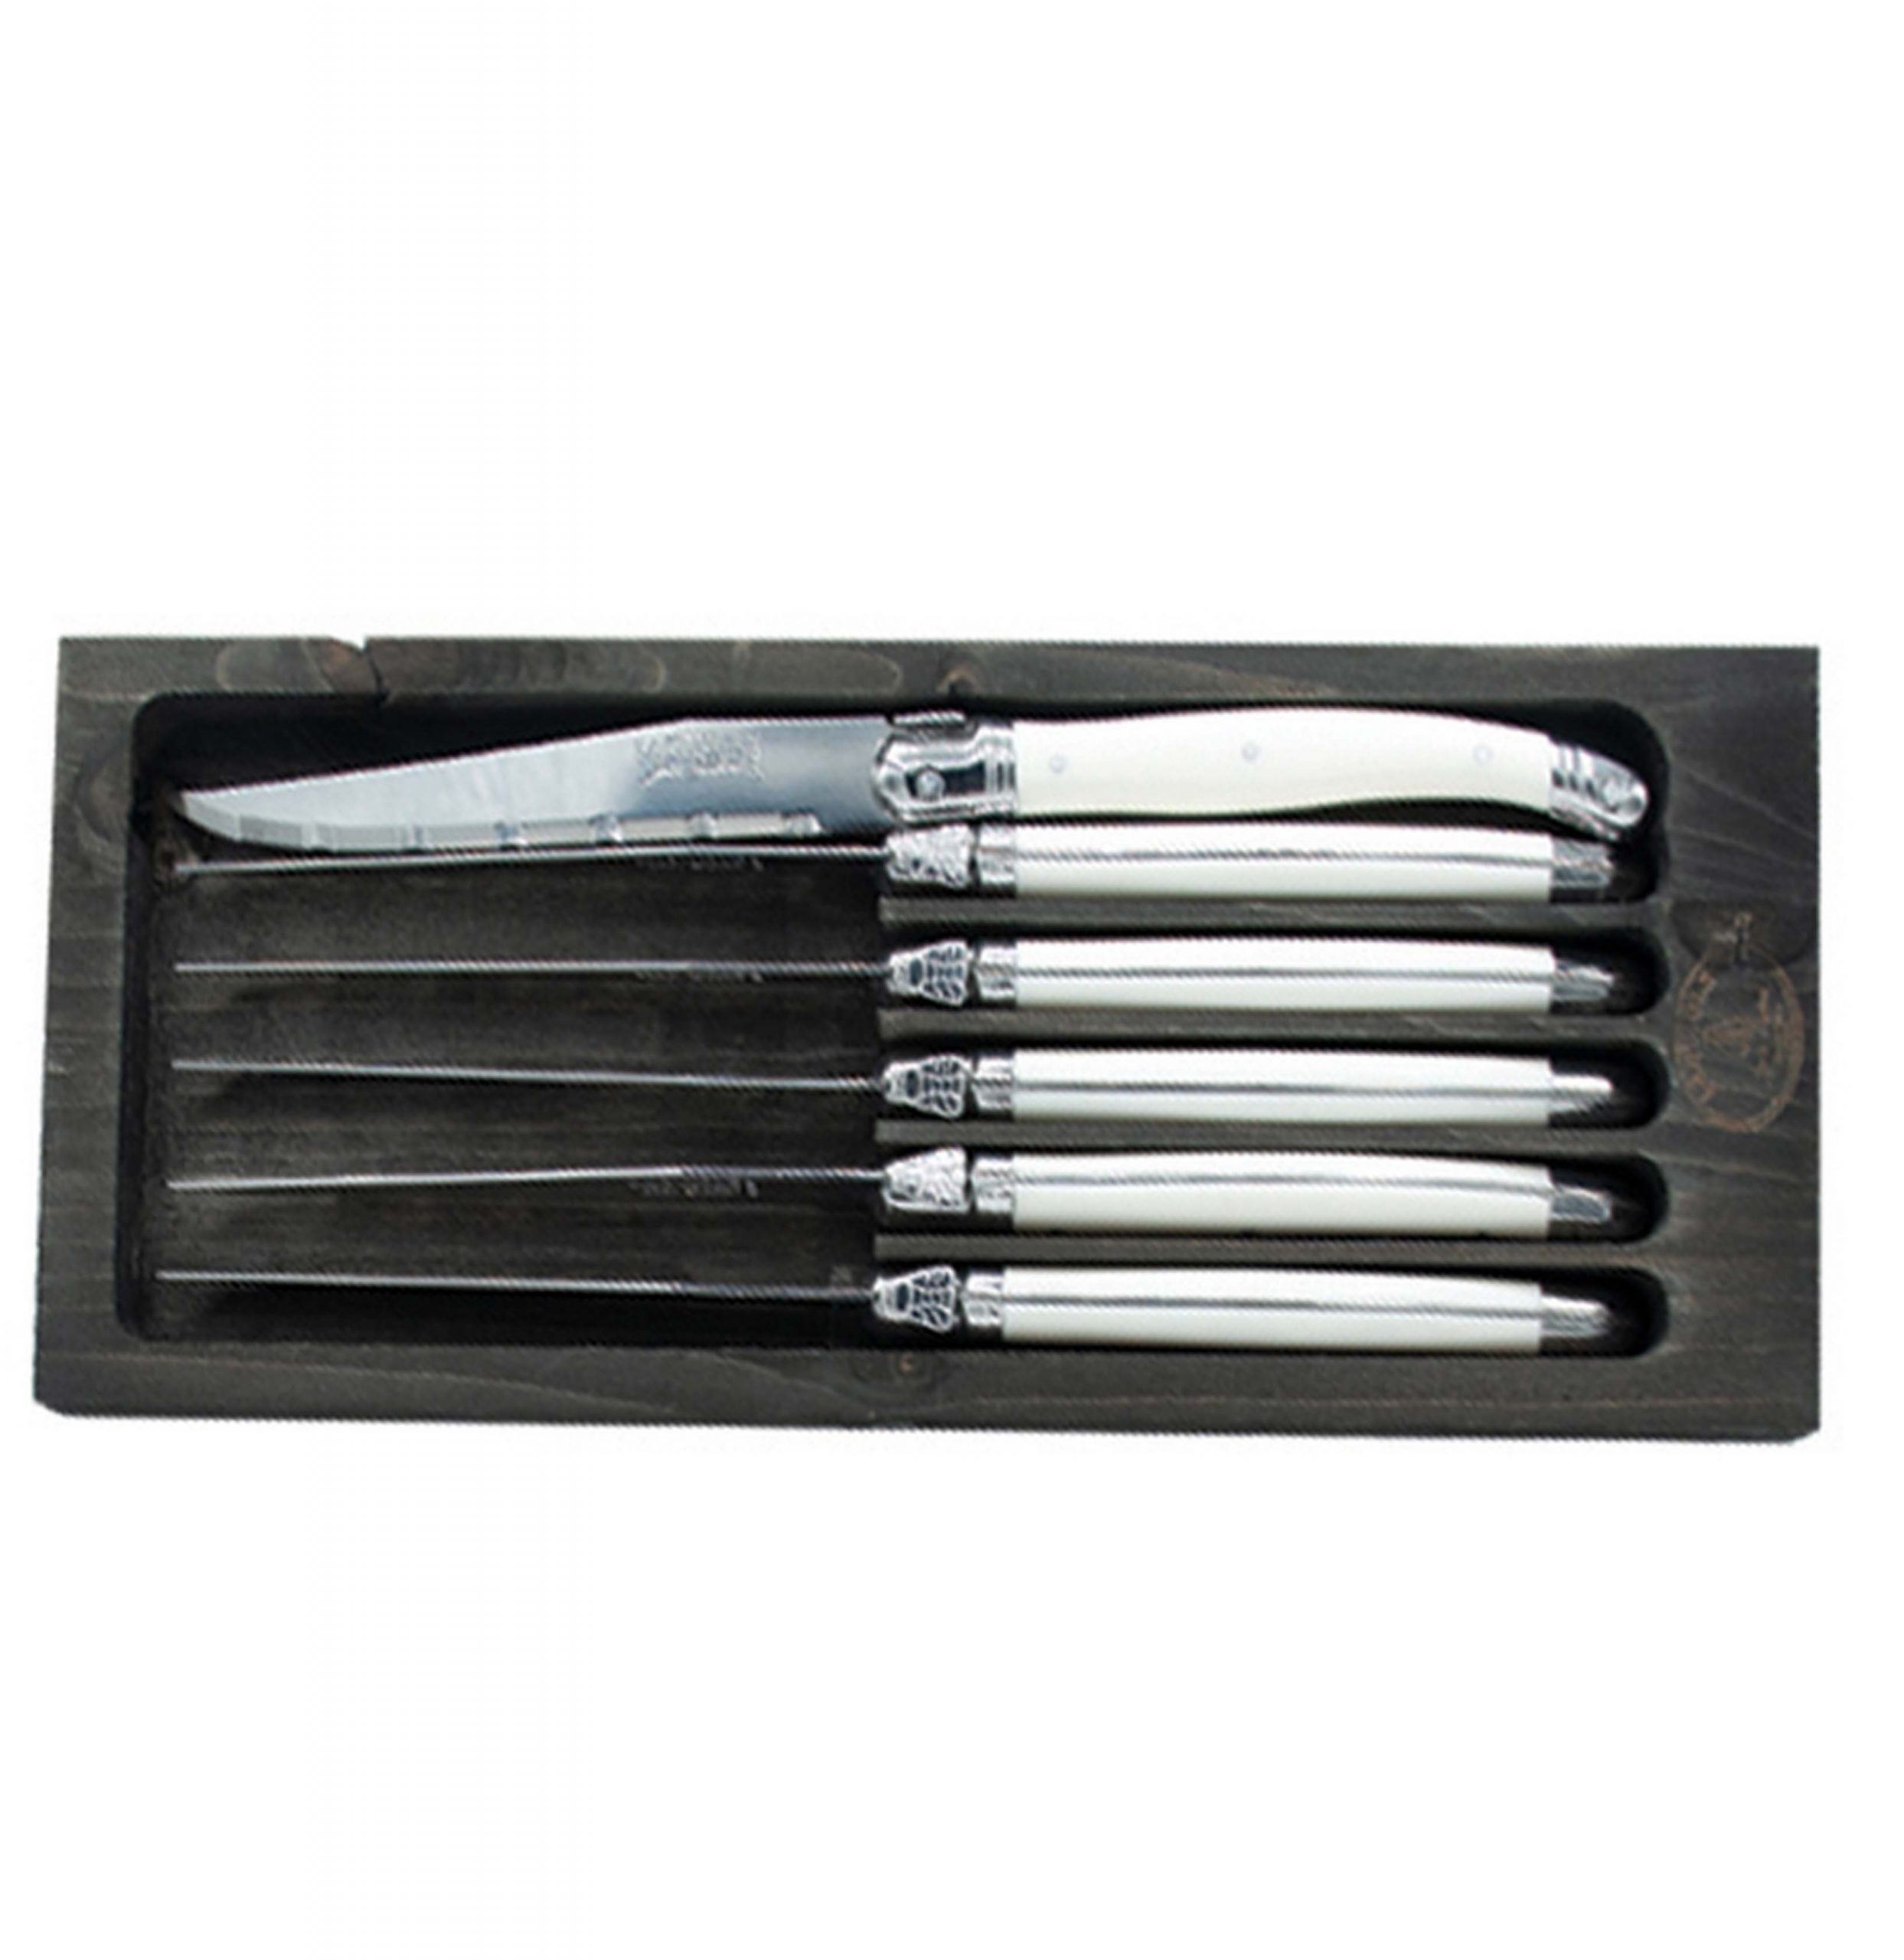 https://www.astoriahomestore.com/wp-content/uploads/2020/03/Laguiole-Jean-Dubost-6-Steak-Knives-with-White-Handles-in-Black-Tray-1-scaled.jpg